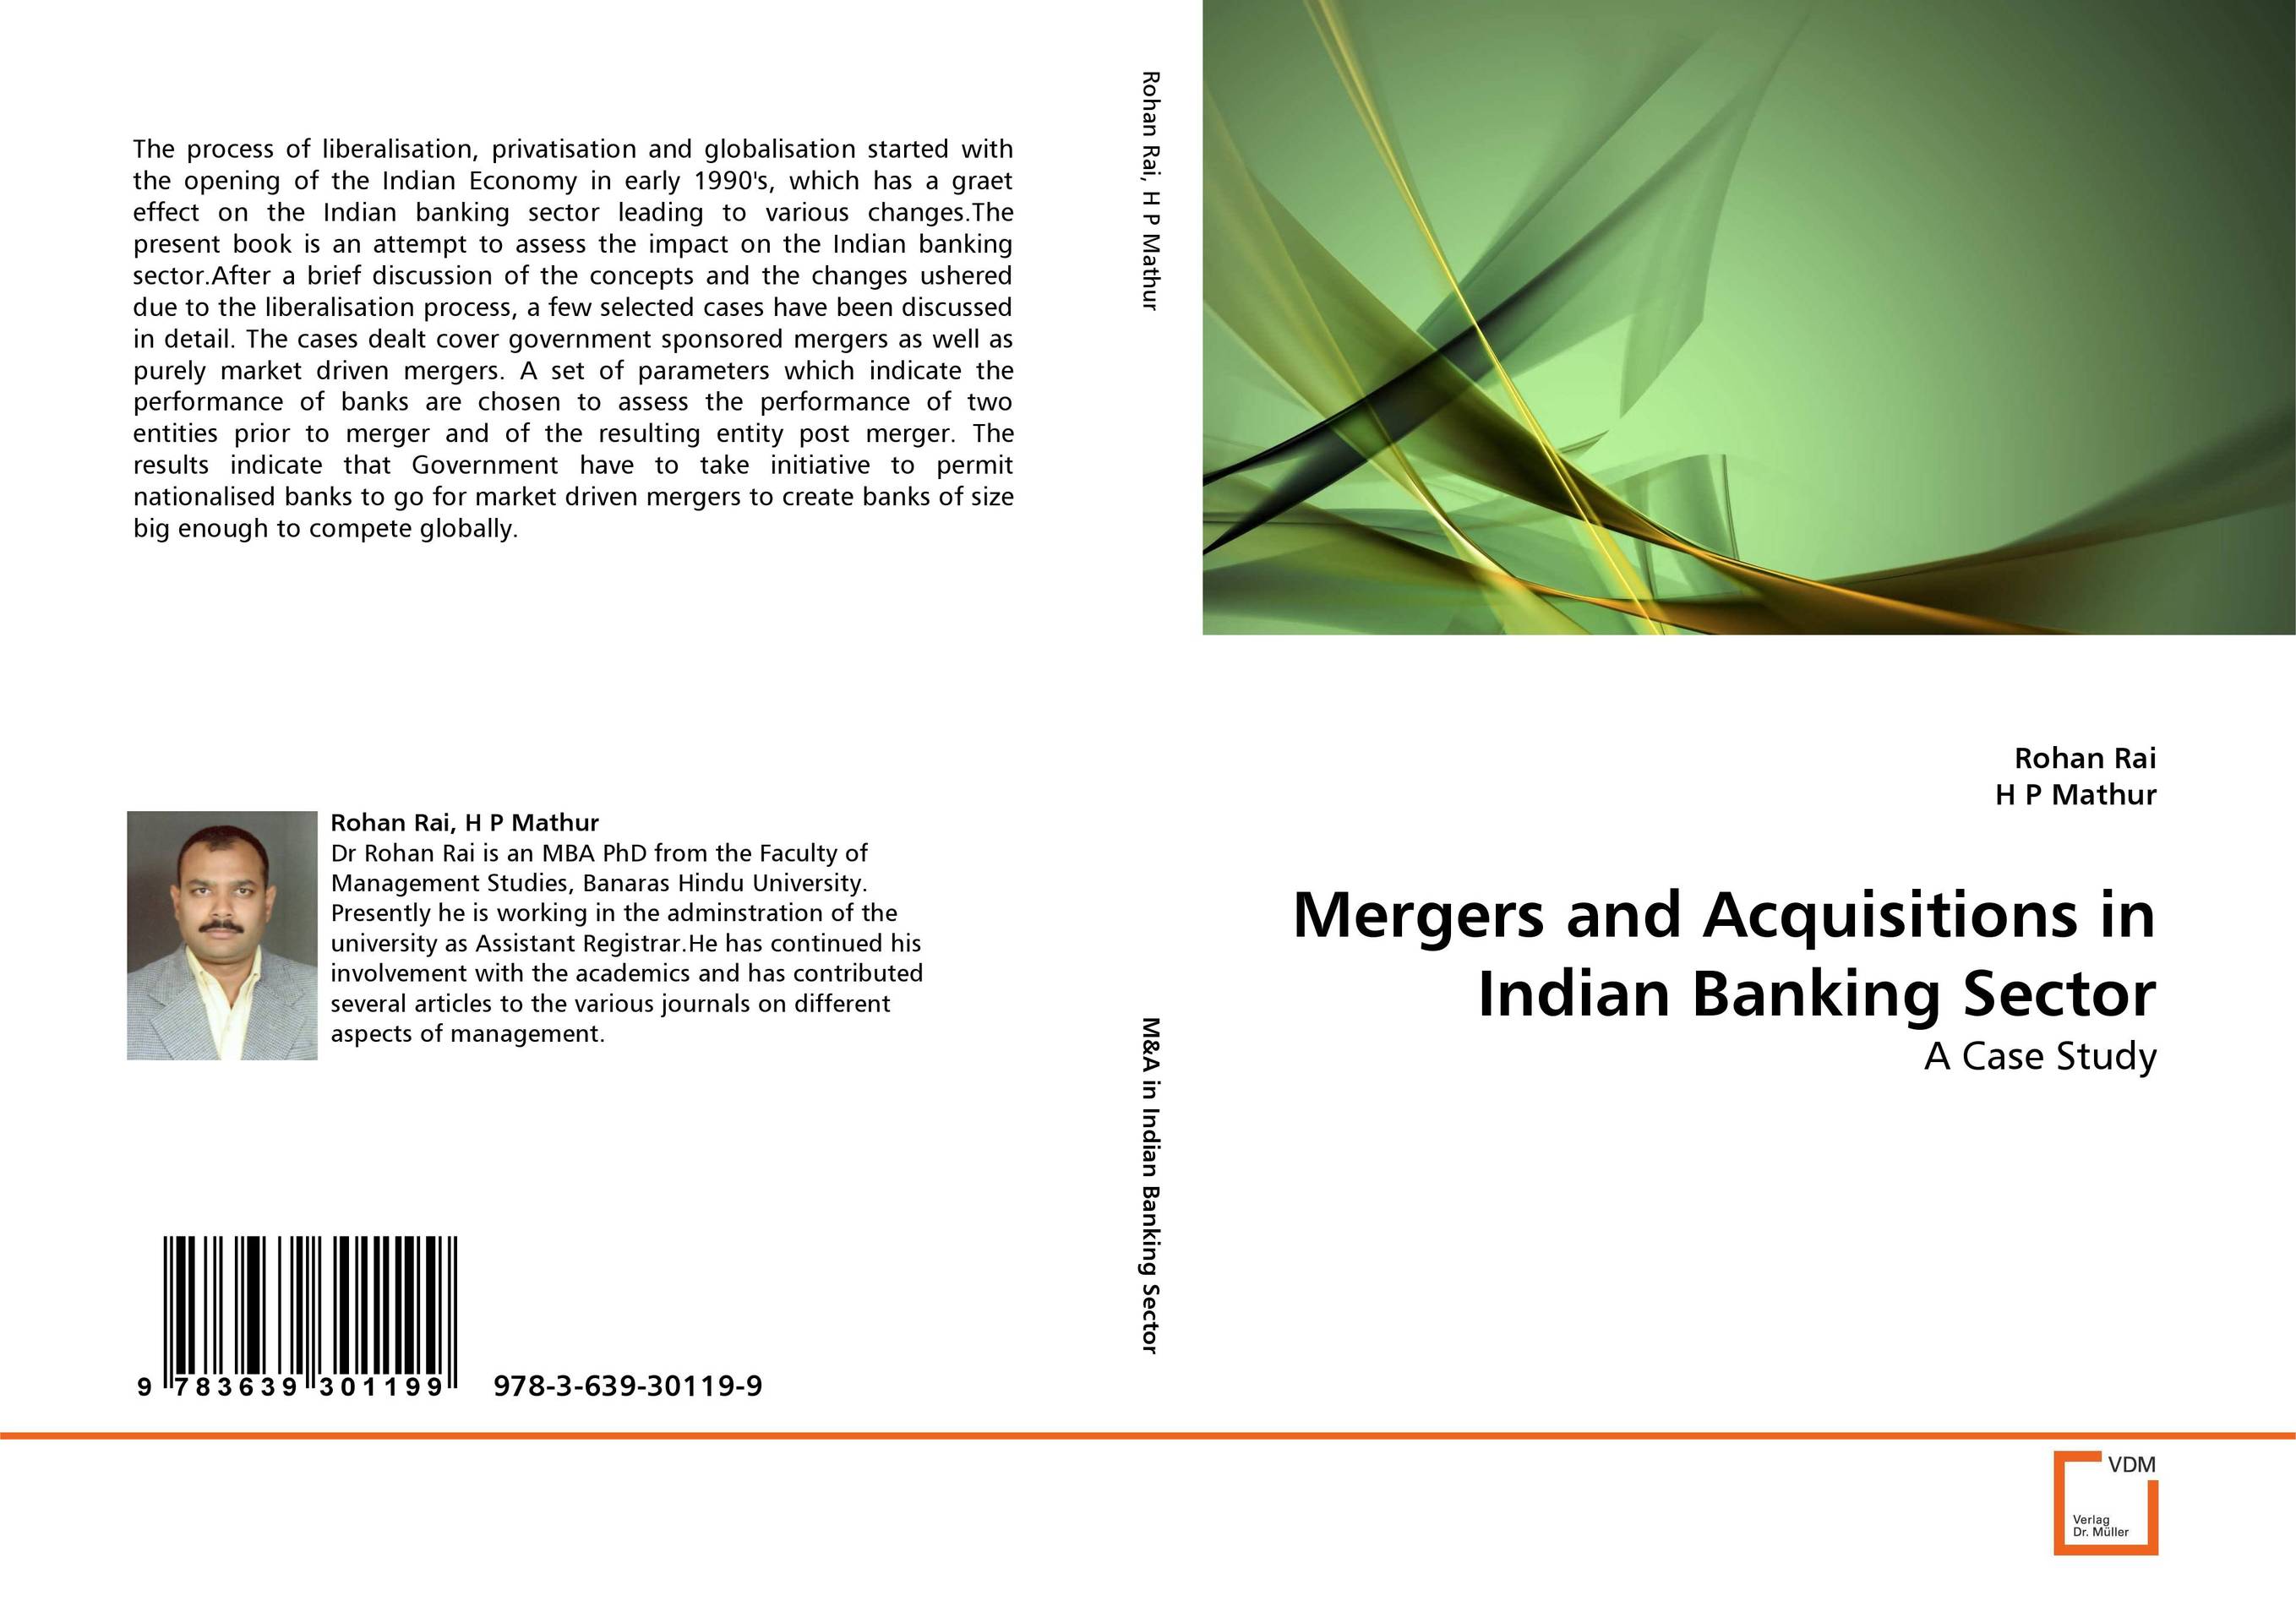 mergers and acquisitions in banking sector dissertation